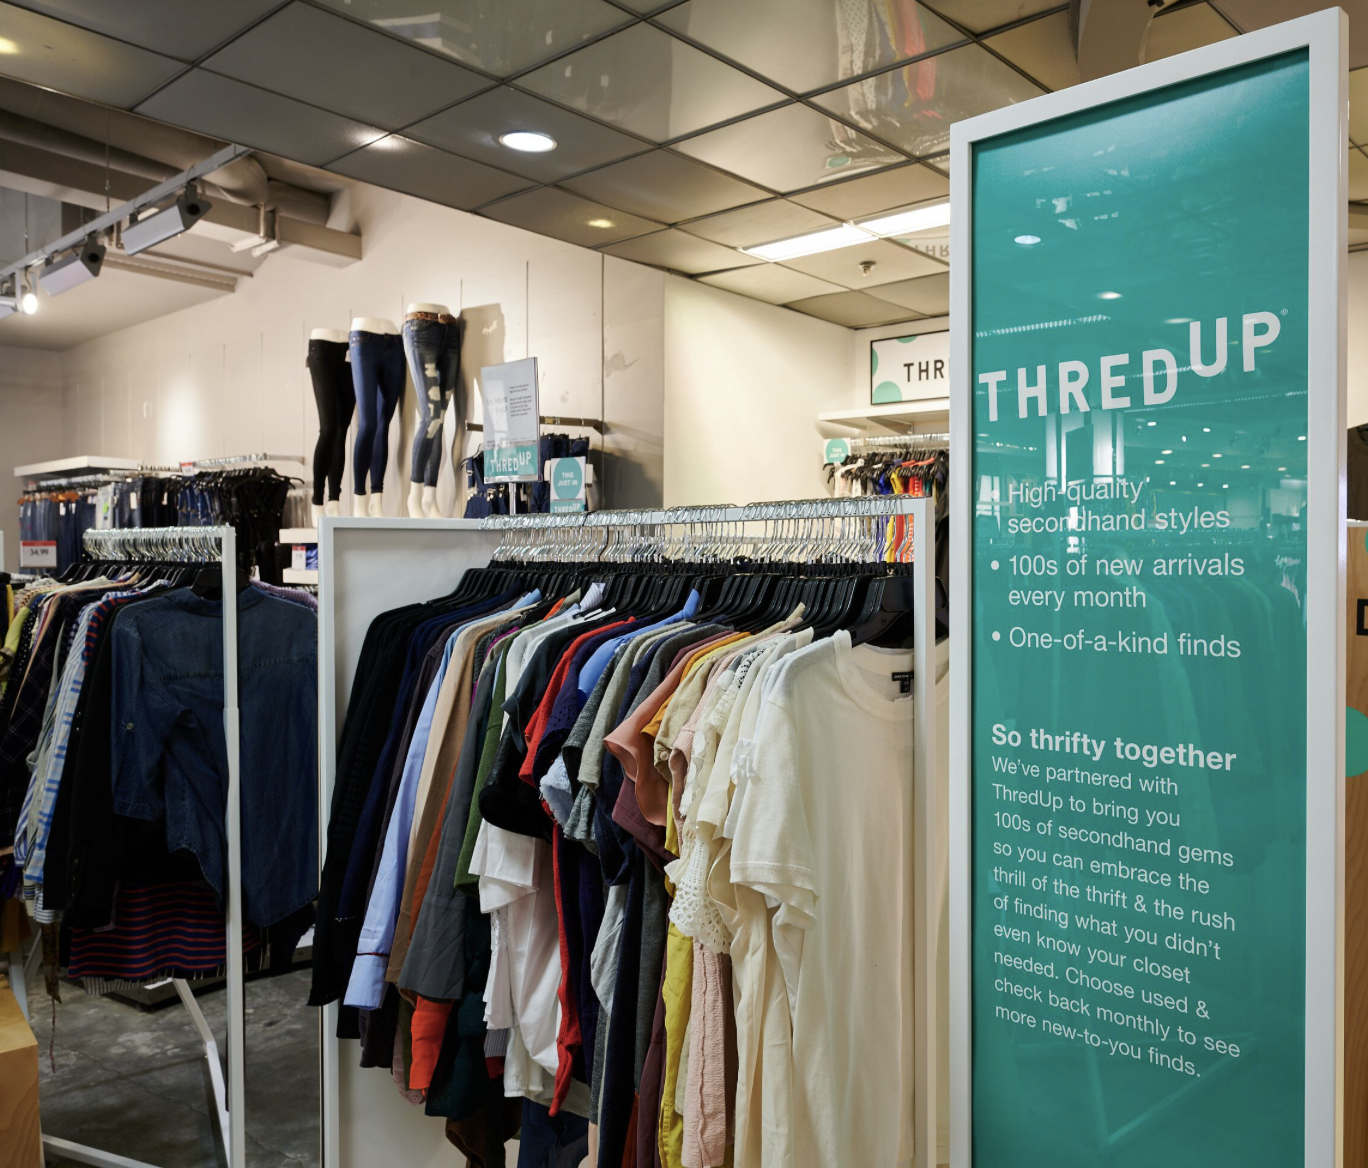 ThredUp, whose second-hand goods will start appearing at Macy's